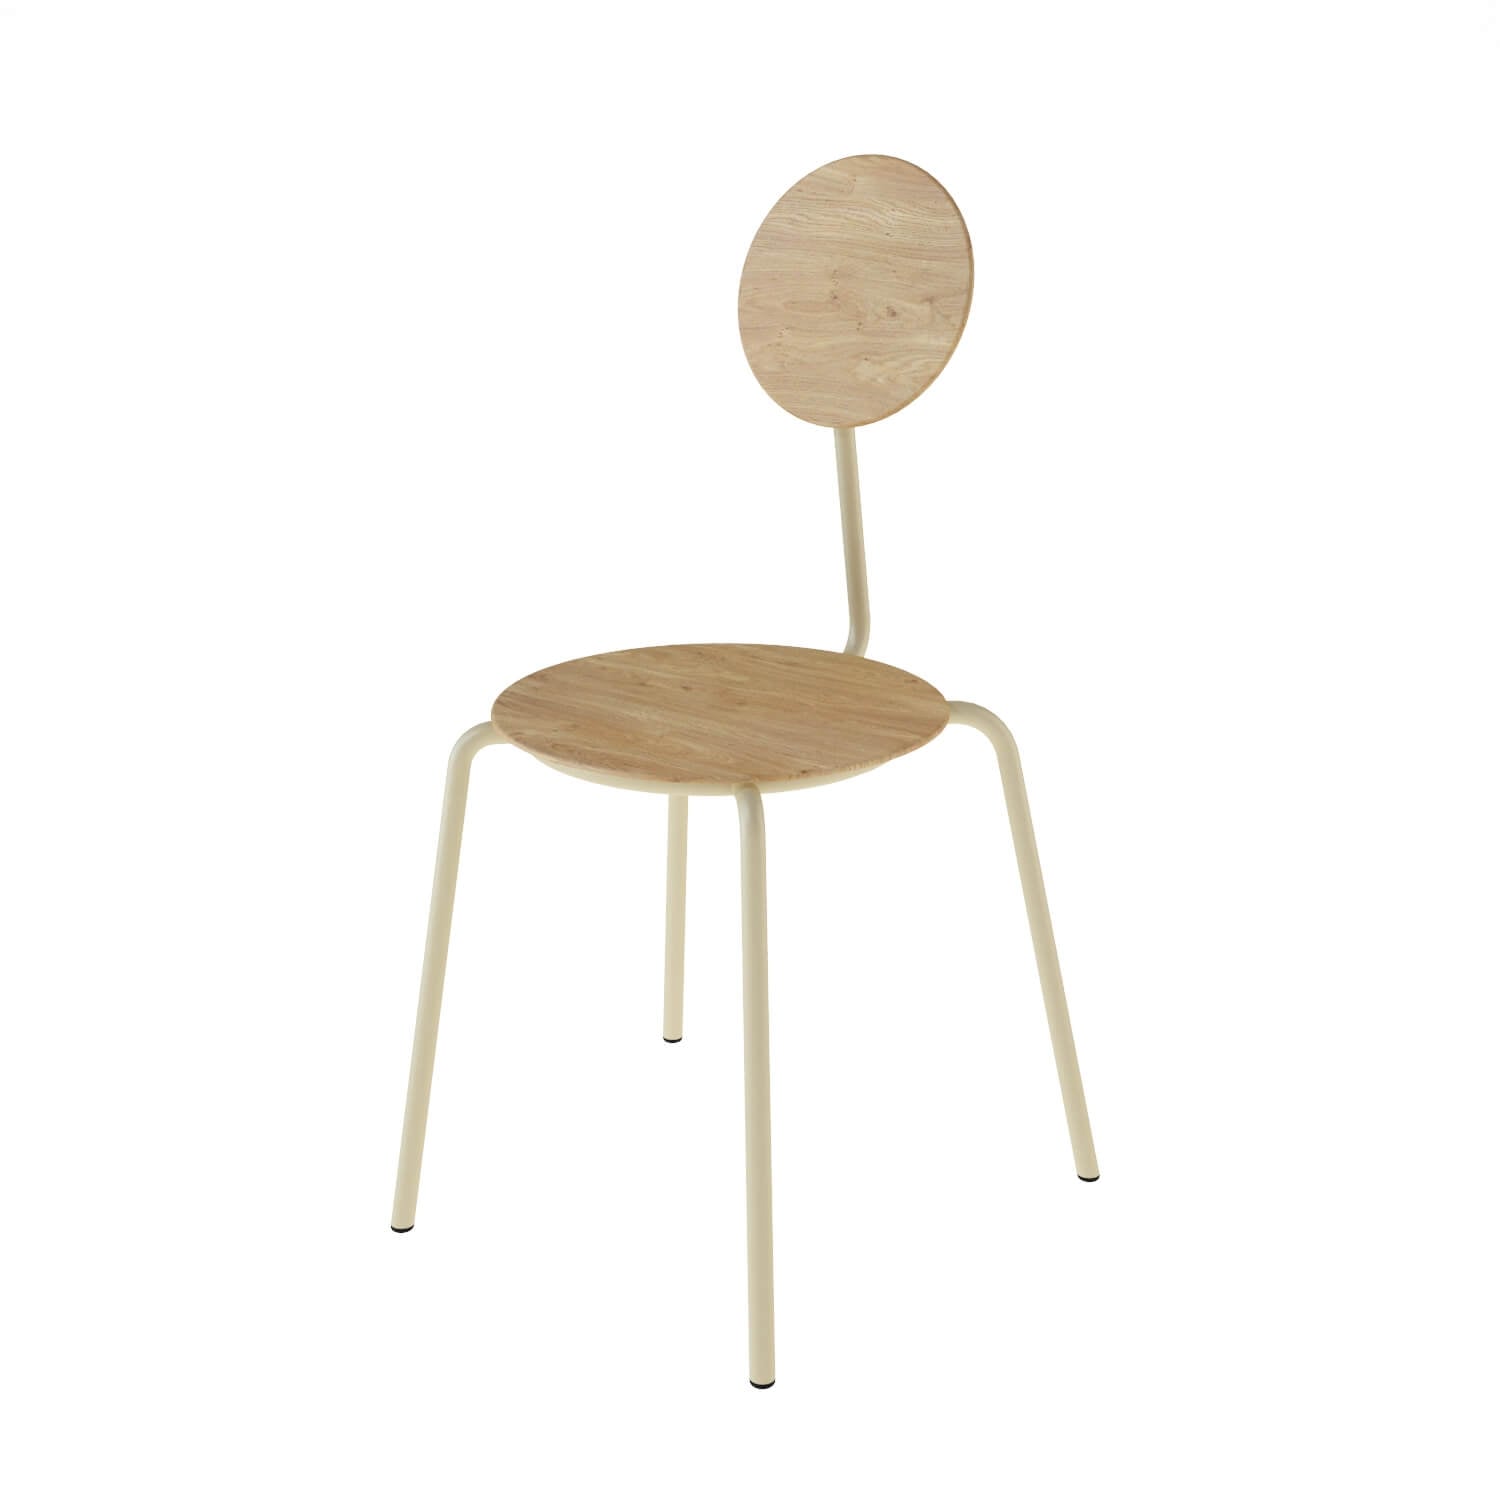 Dewy circle dining chair